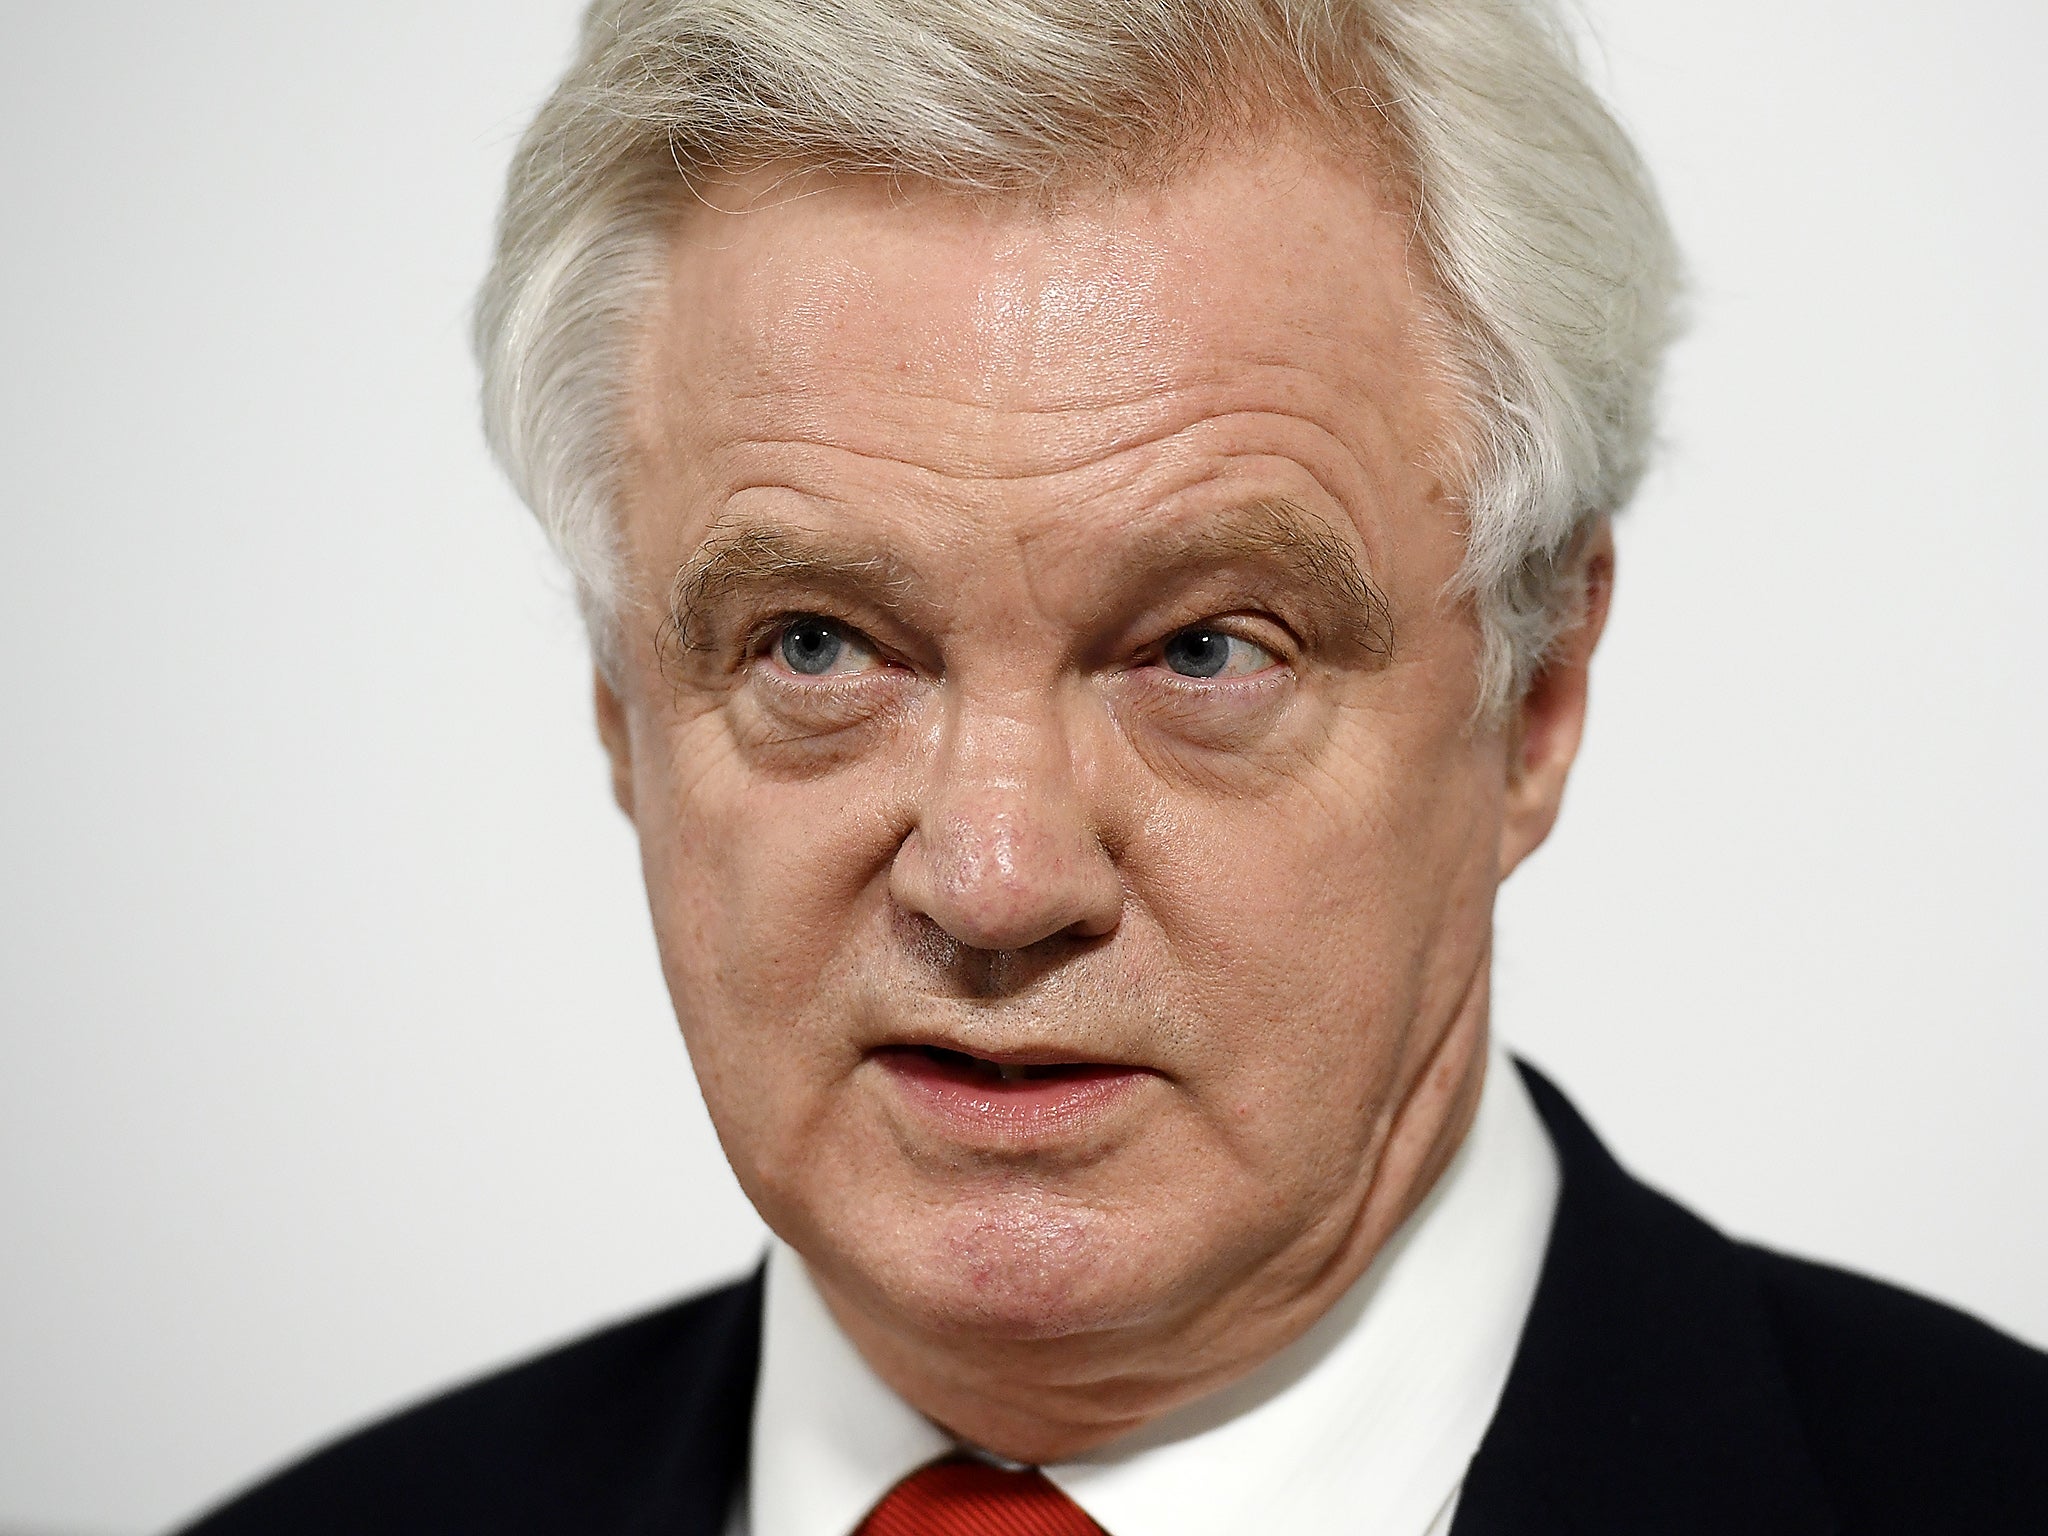 Brexit Secretary David Davis wants a continuation of the EHIC system